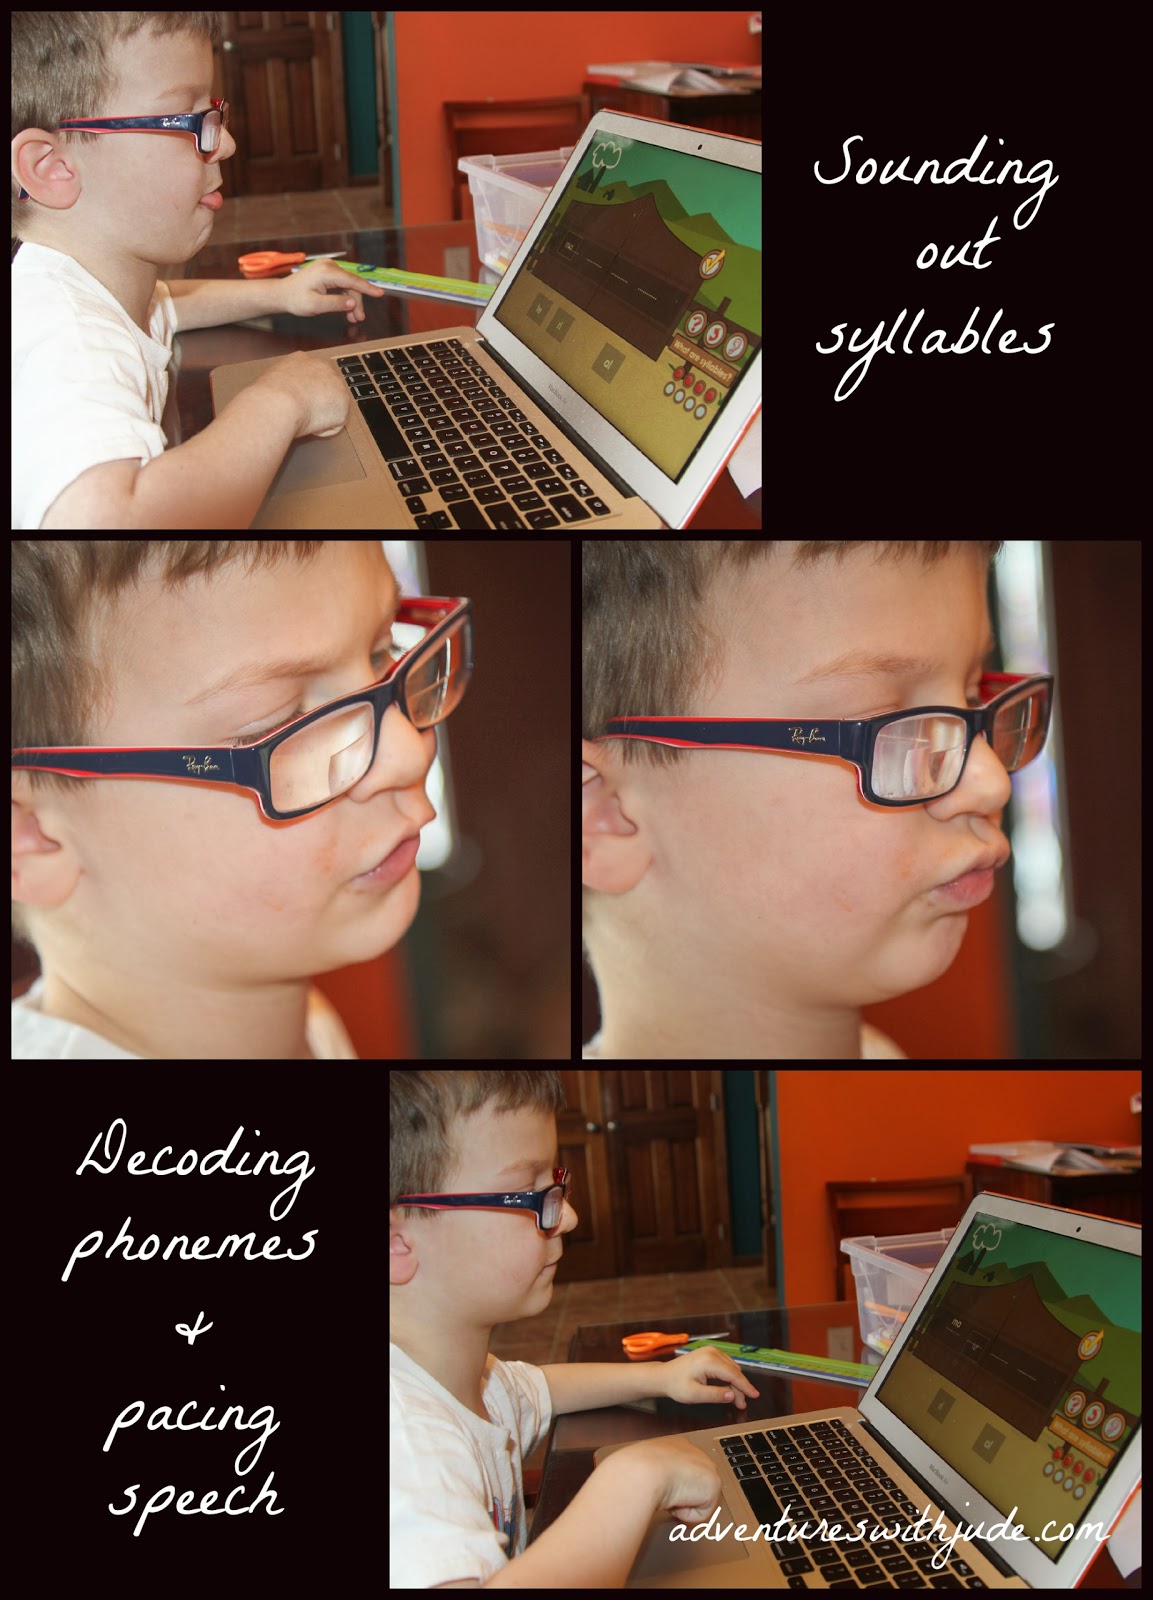 syllables and articulation practice